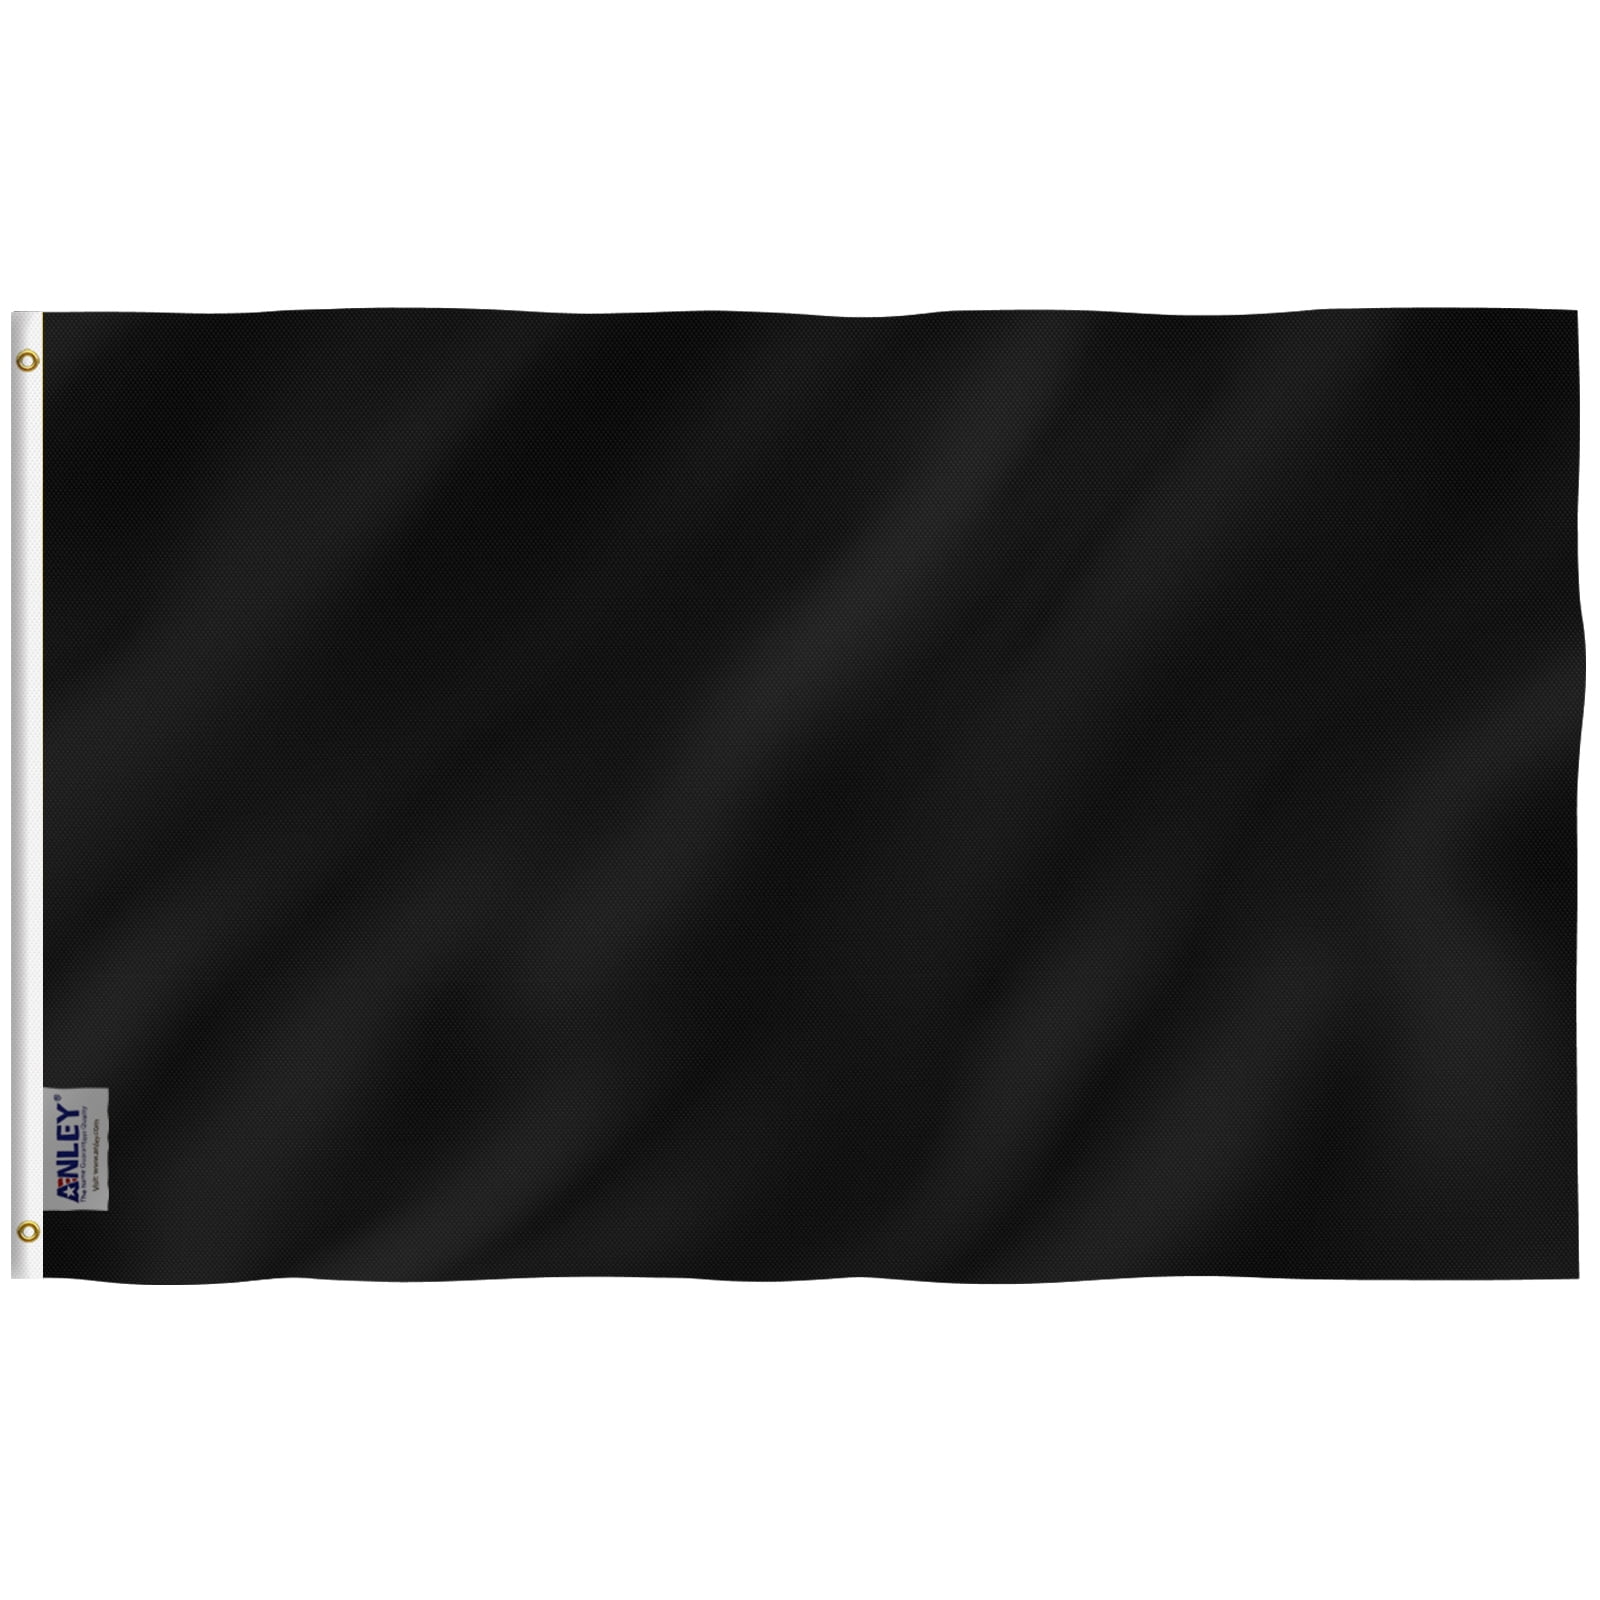 Anley 3x5 Foot Solid Black Flag - Plain Black Flags Polyester